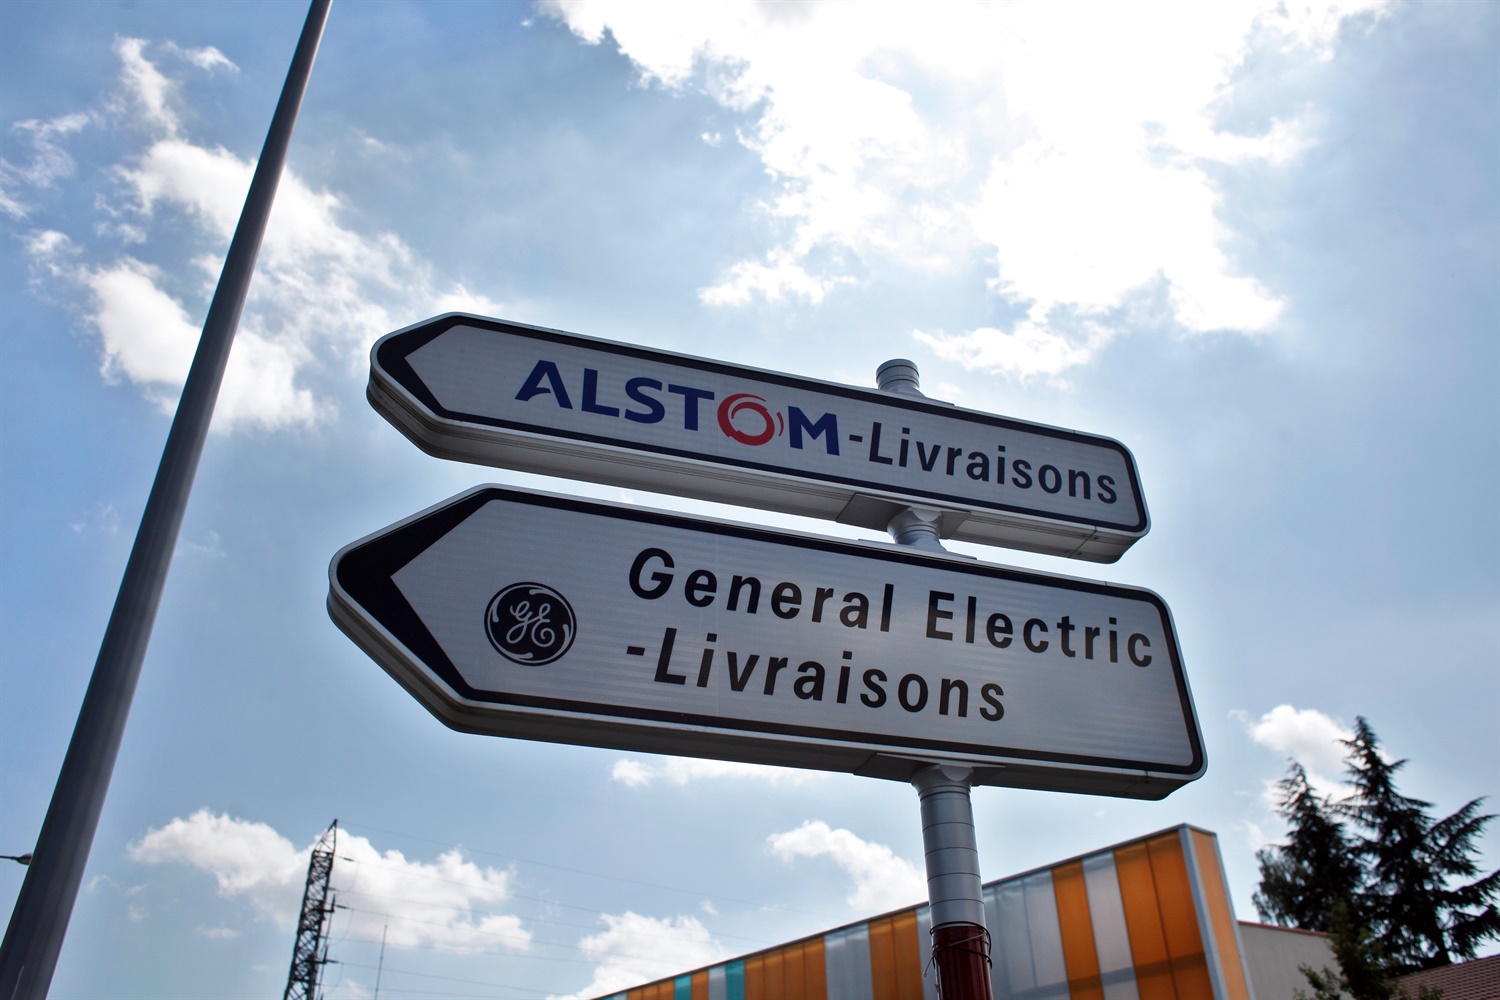 Alstom now entirely focused on rail industry